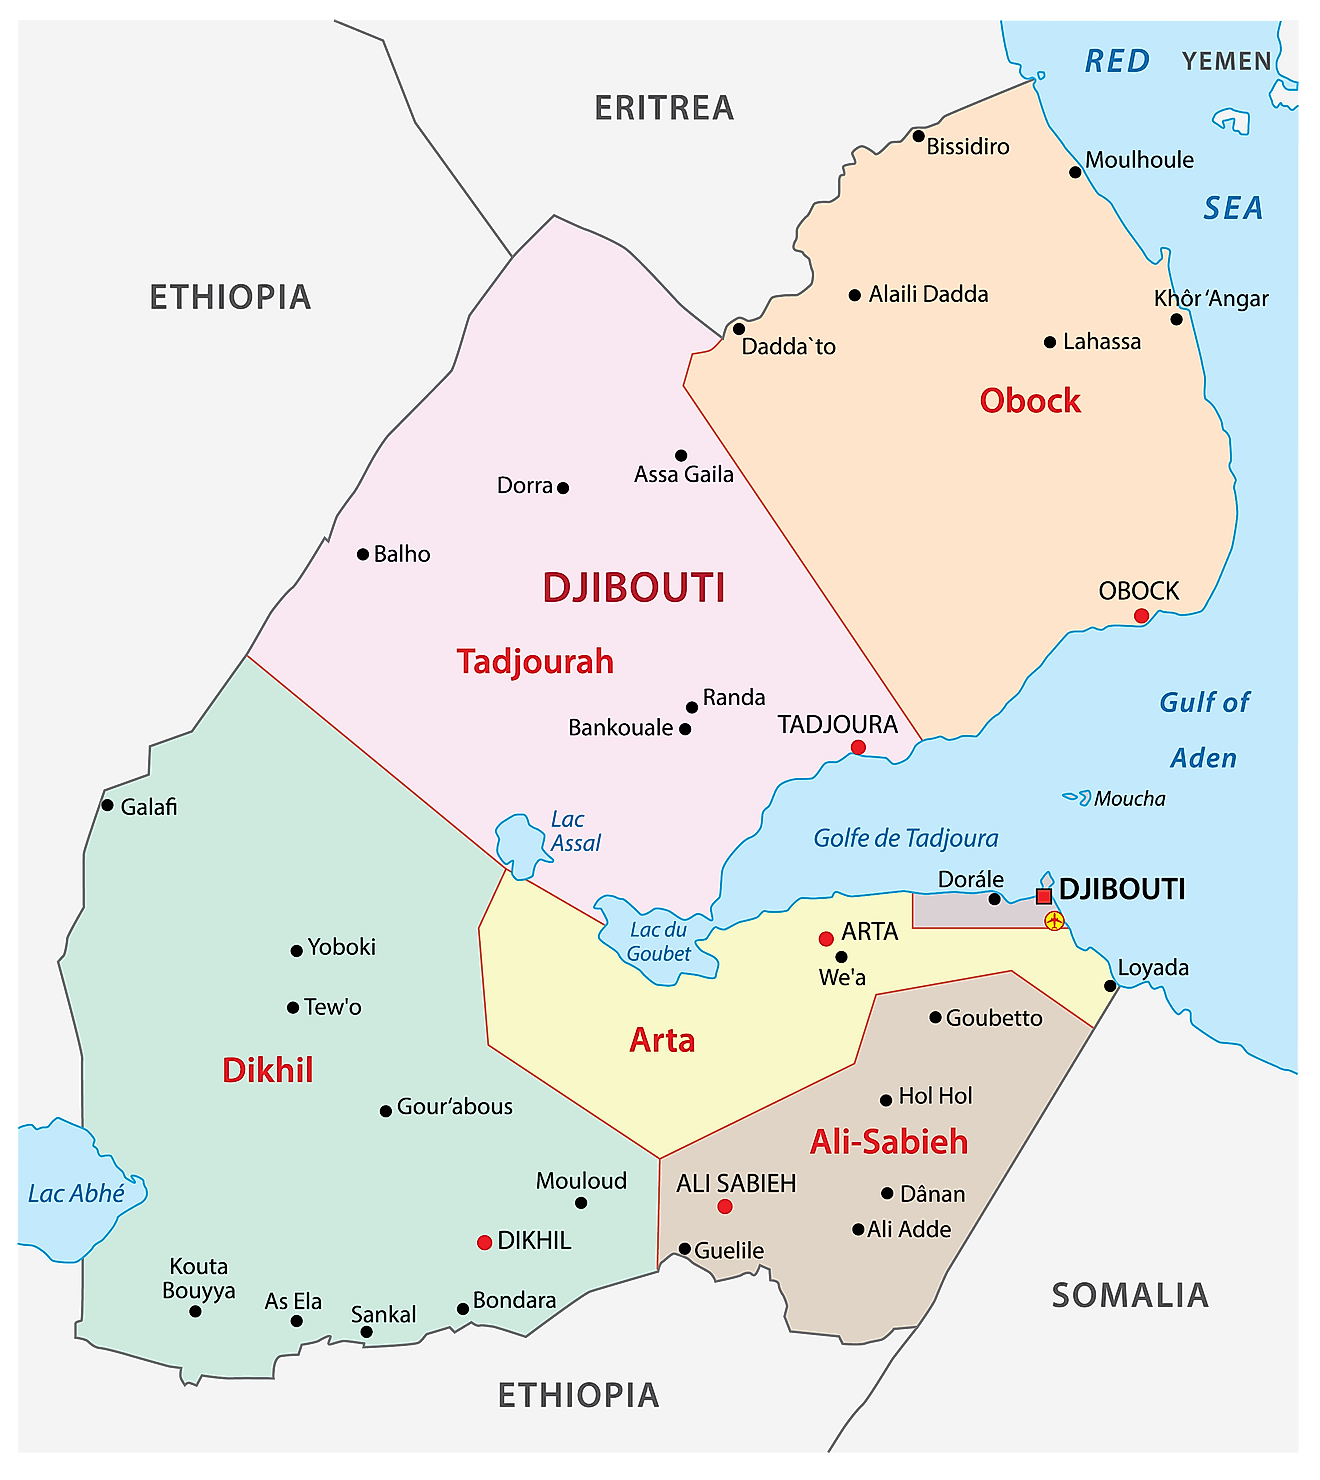 Political Map of Djibouti displaying 6 regions, their capital cities, and the national capital of Djibouti City.